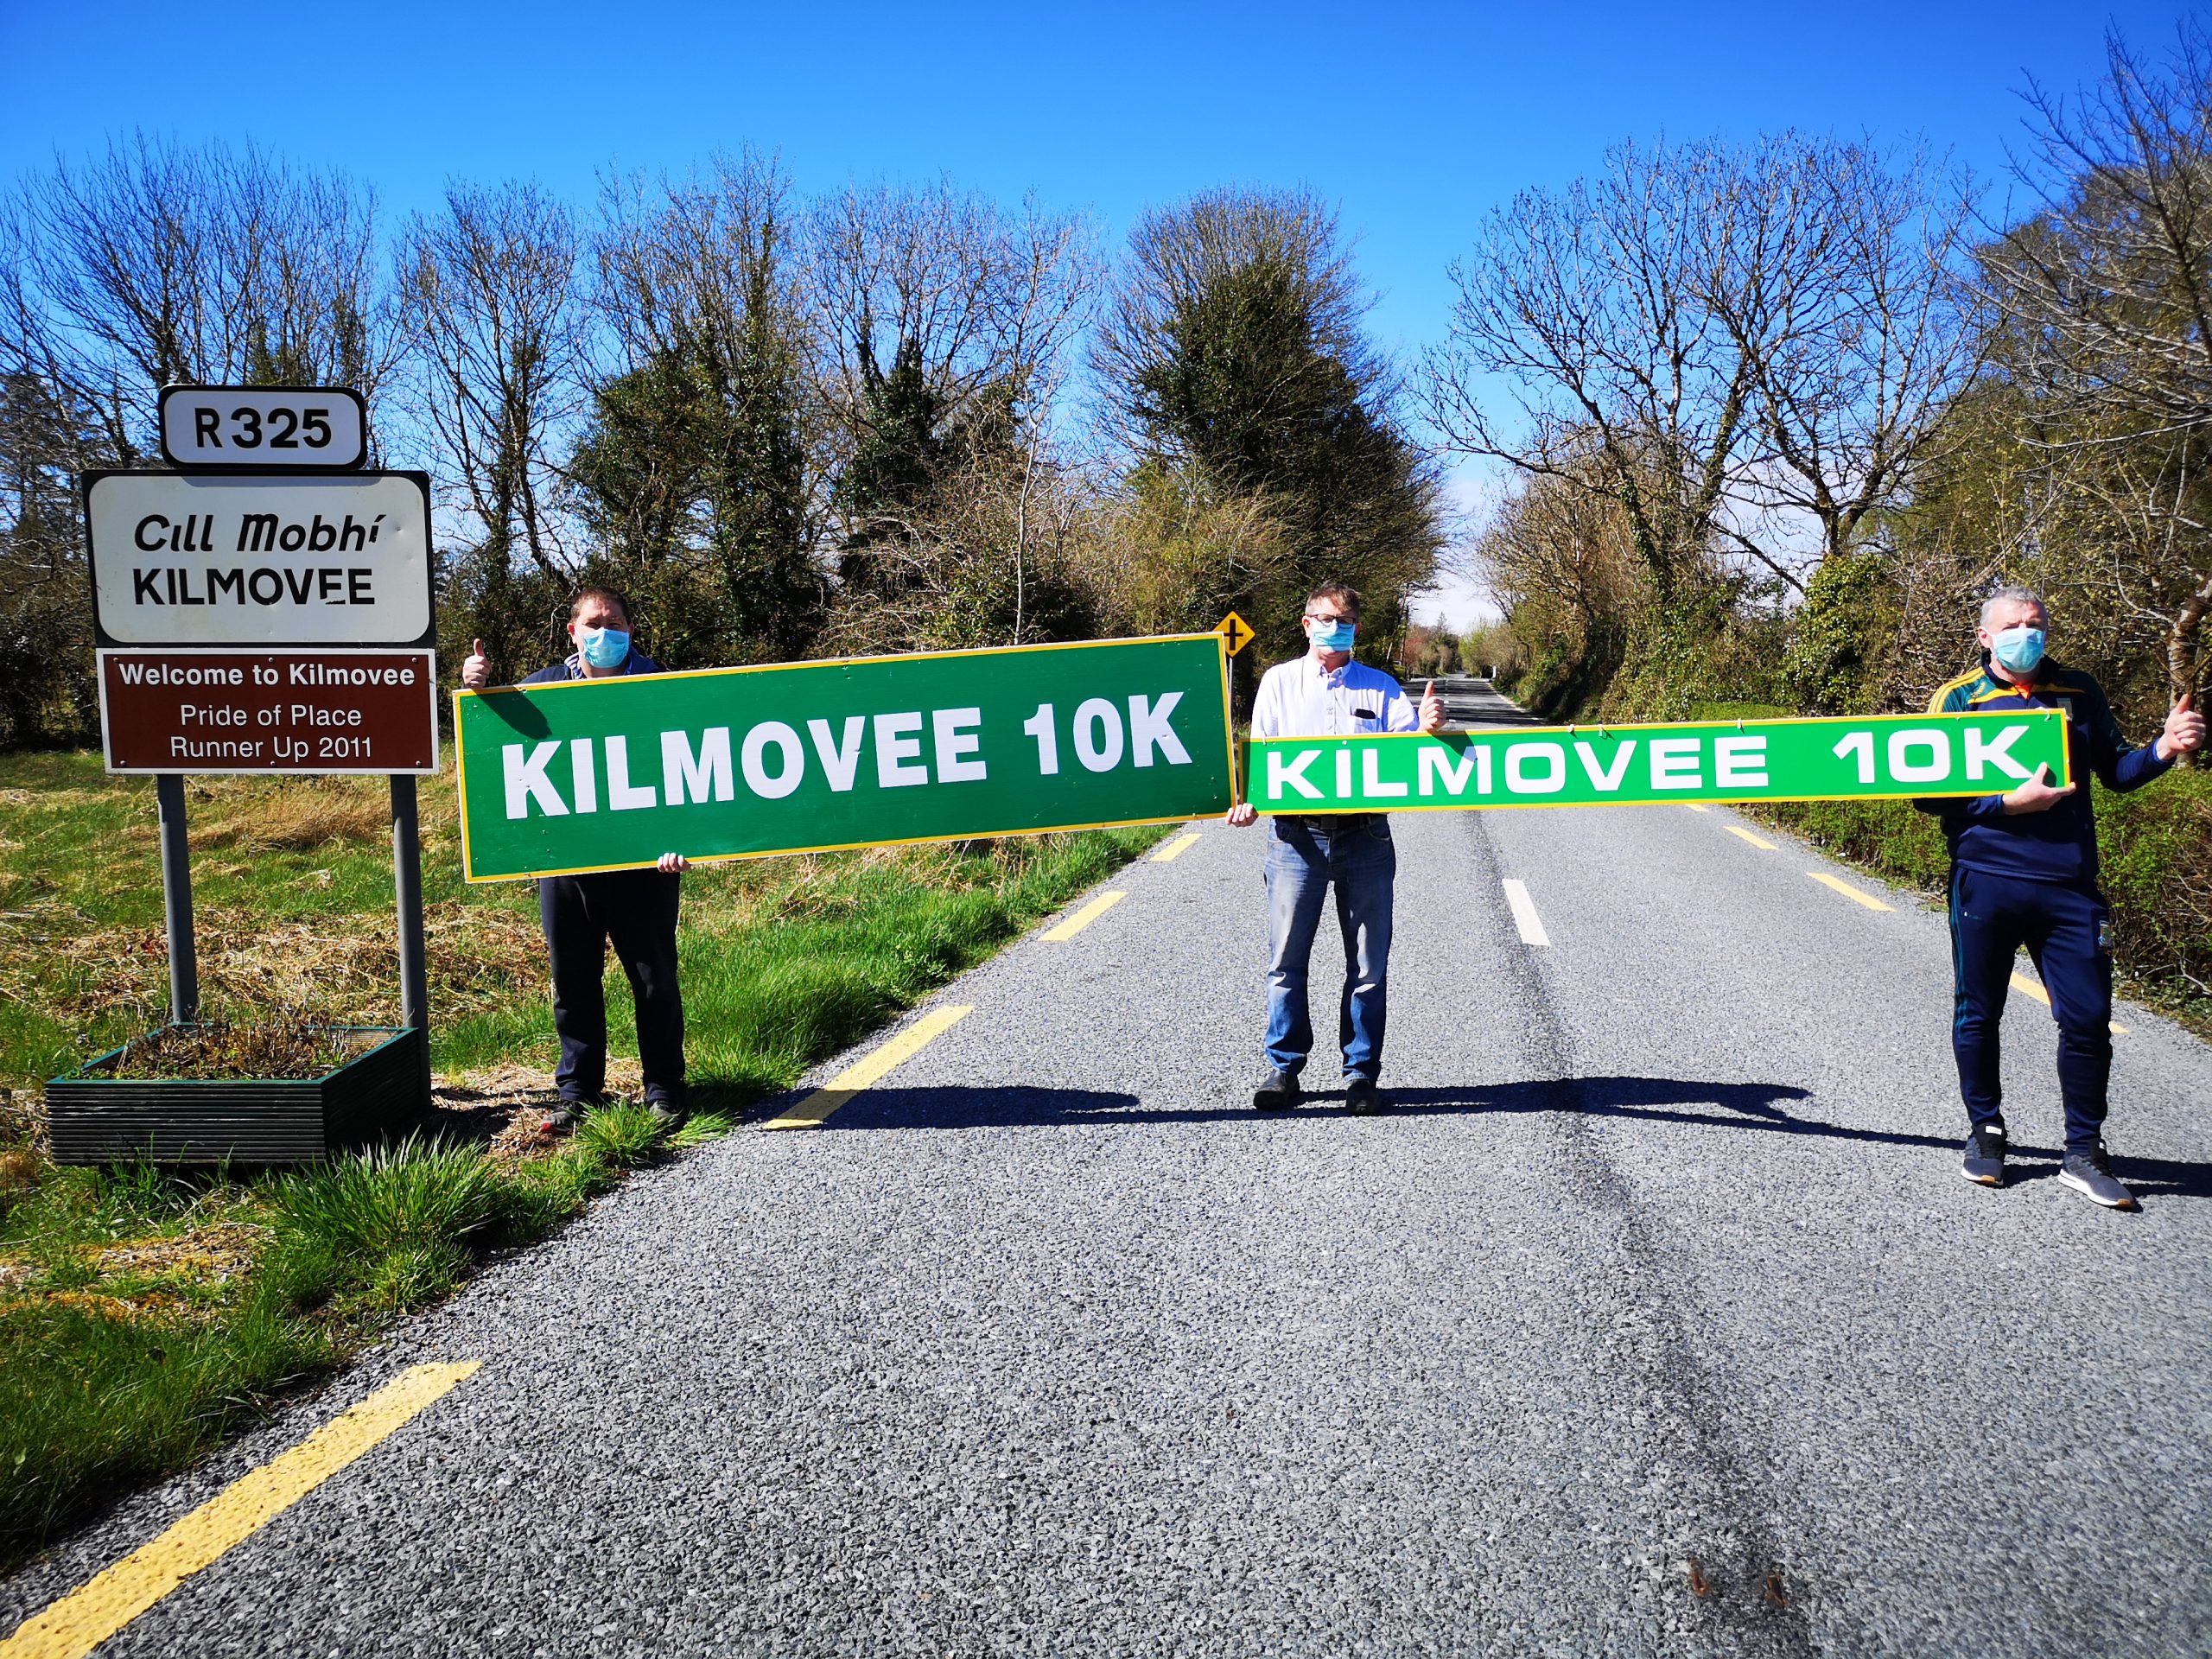 Members of Kilmovee 10k Committee - At a safe distance.